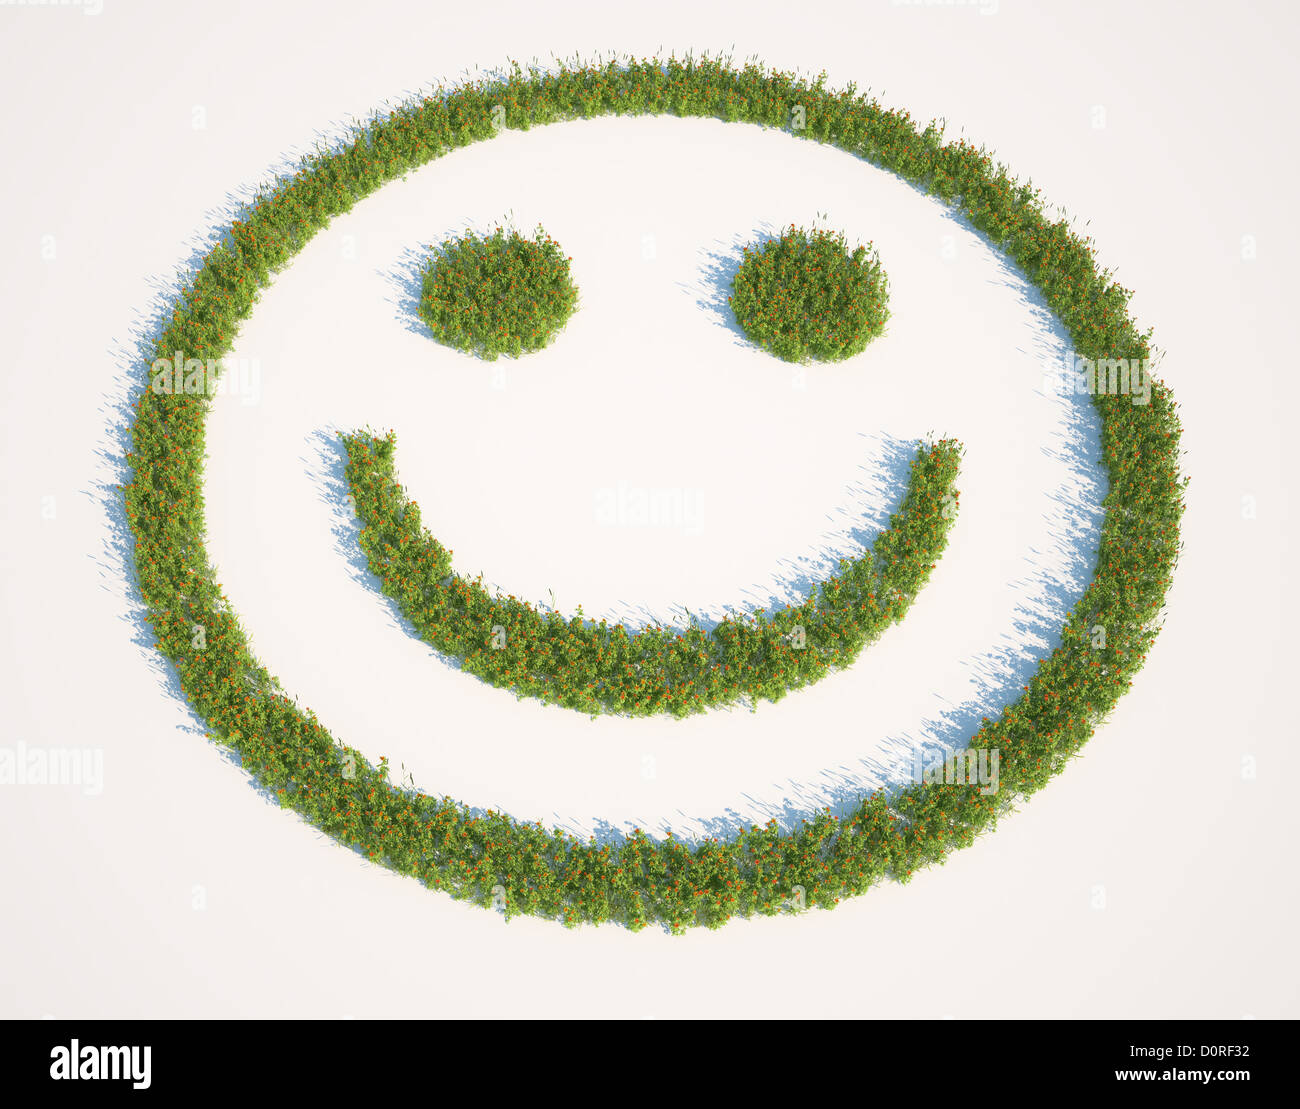 Smiley face shaped grass patch Stock Photo